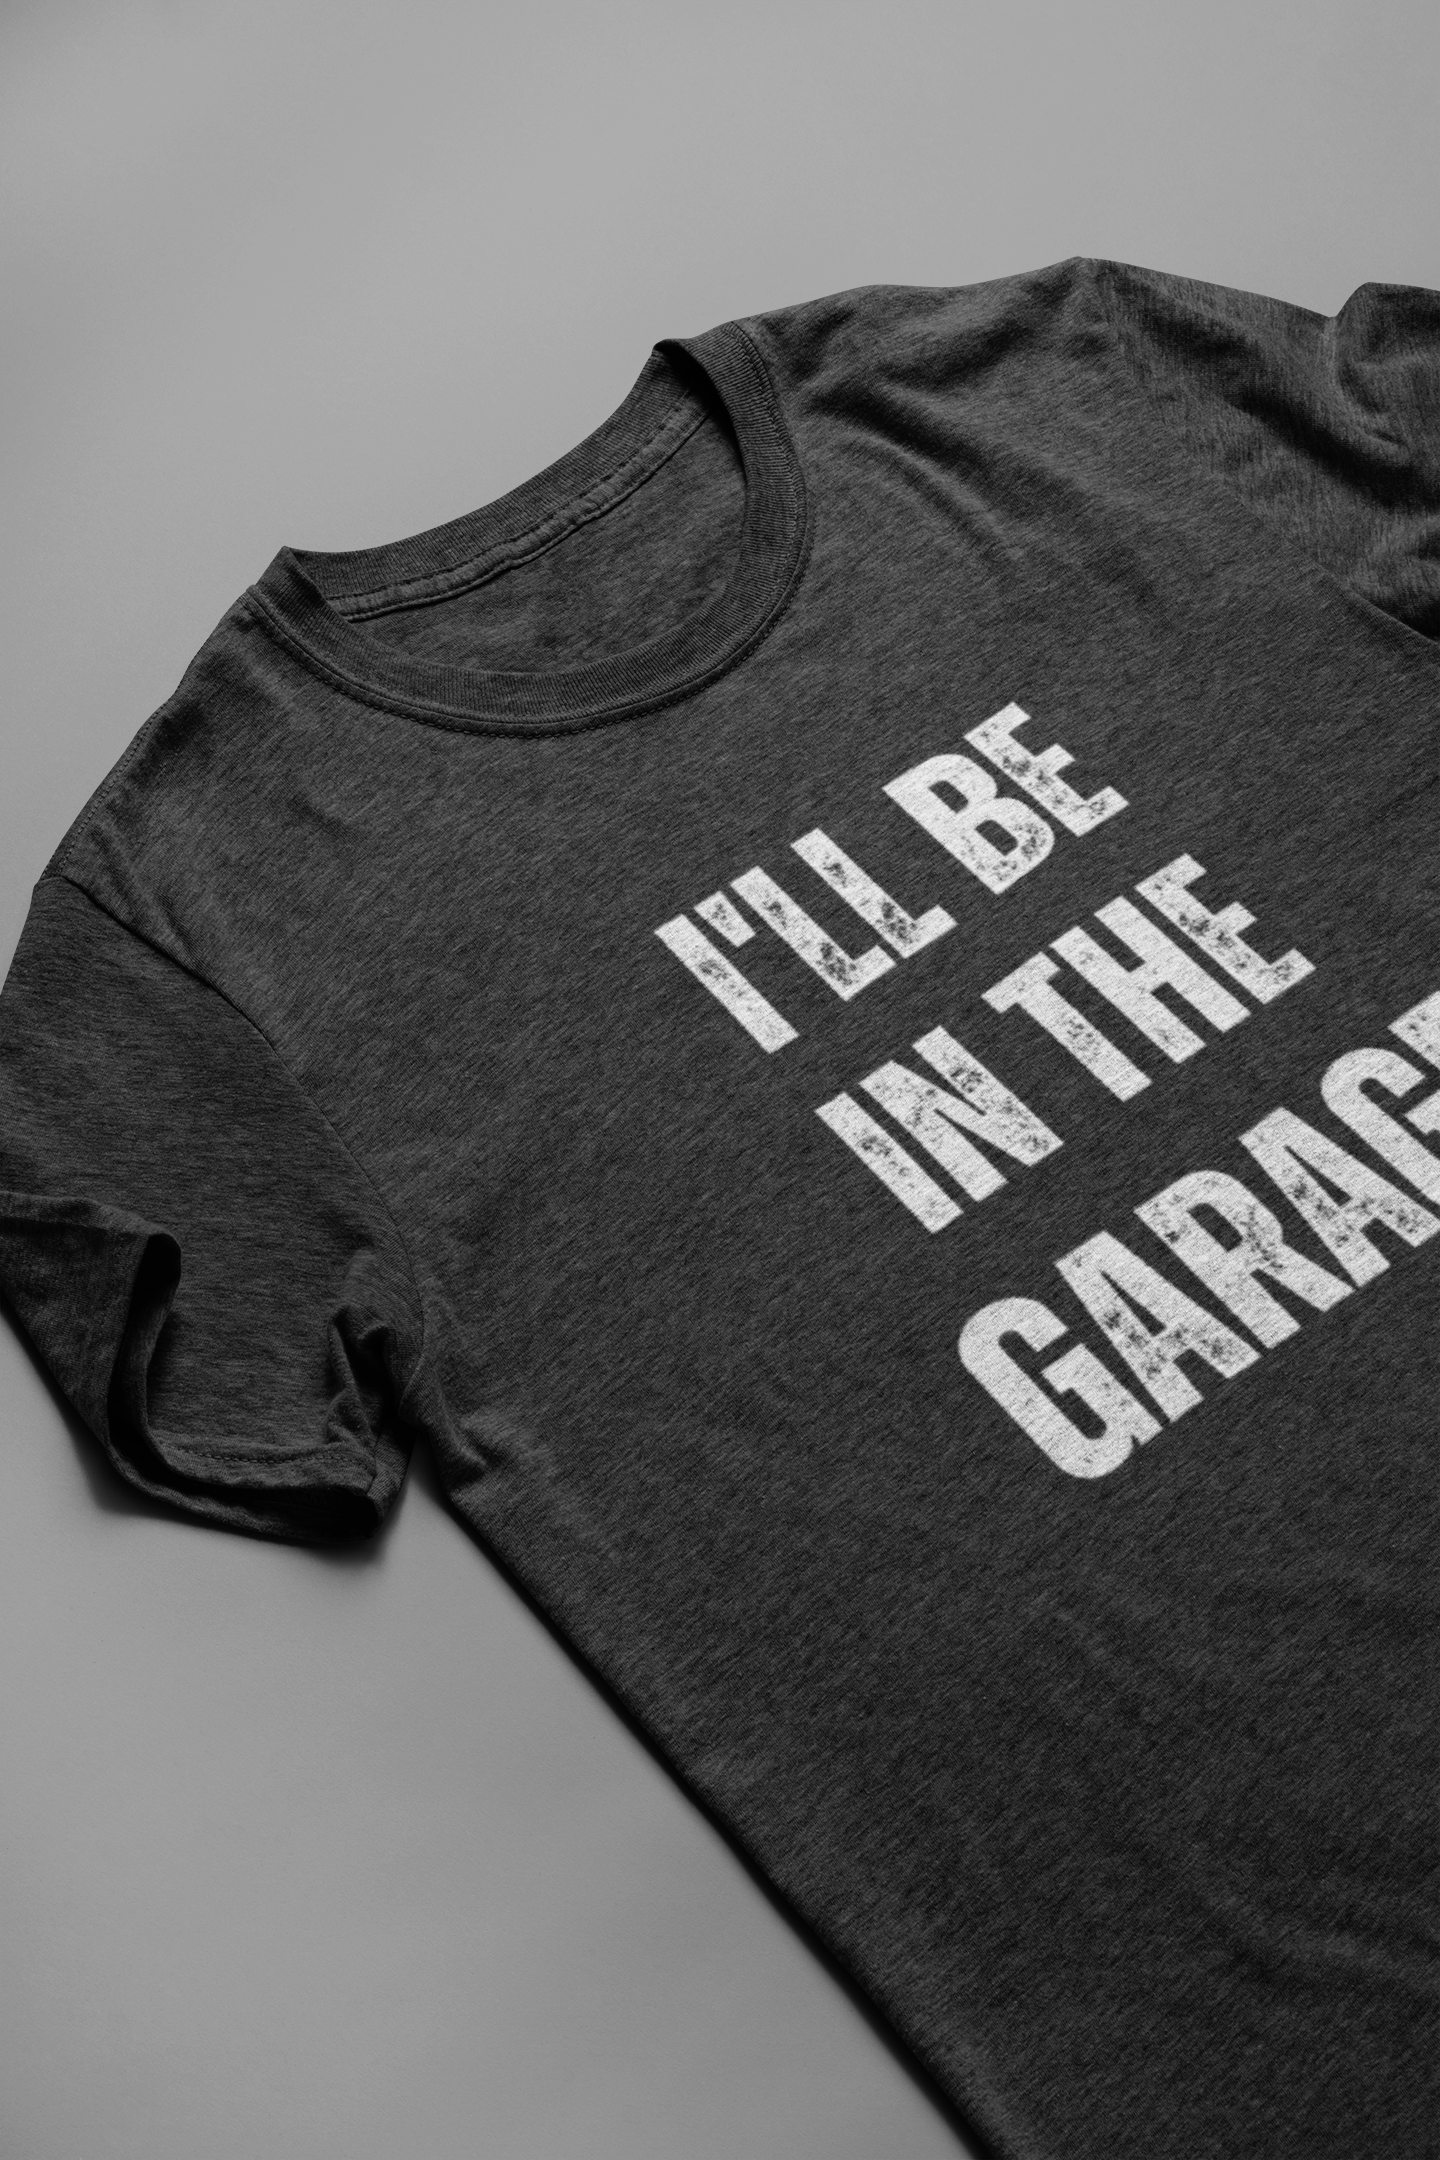 I'll Be In The Garage Tee